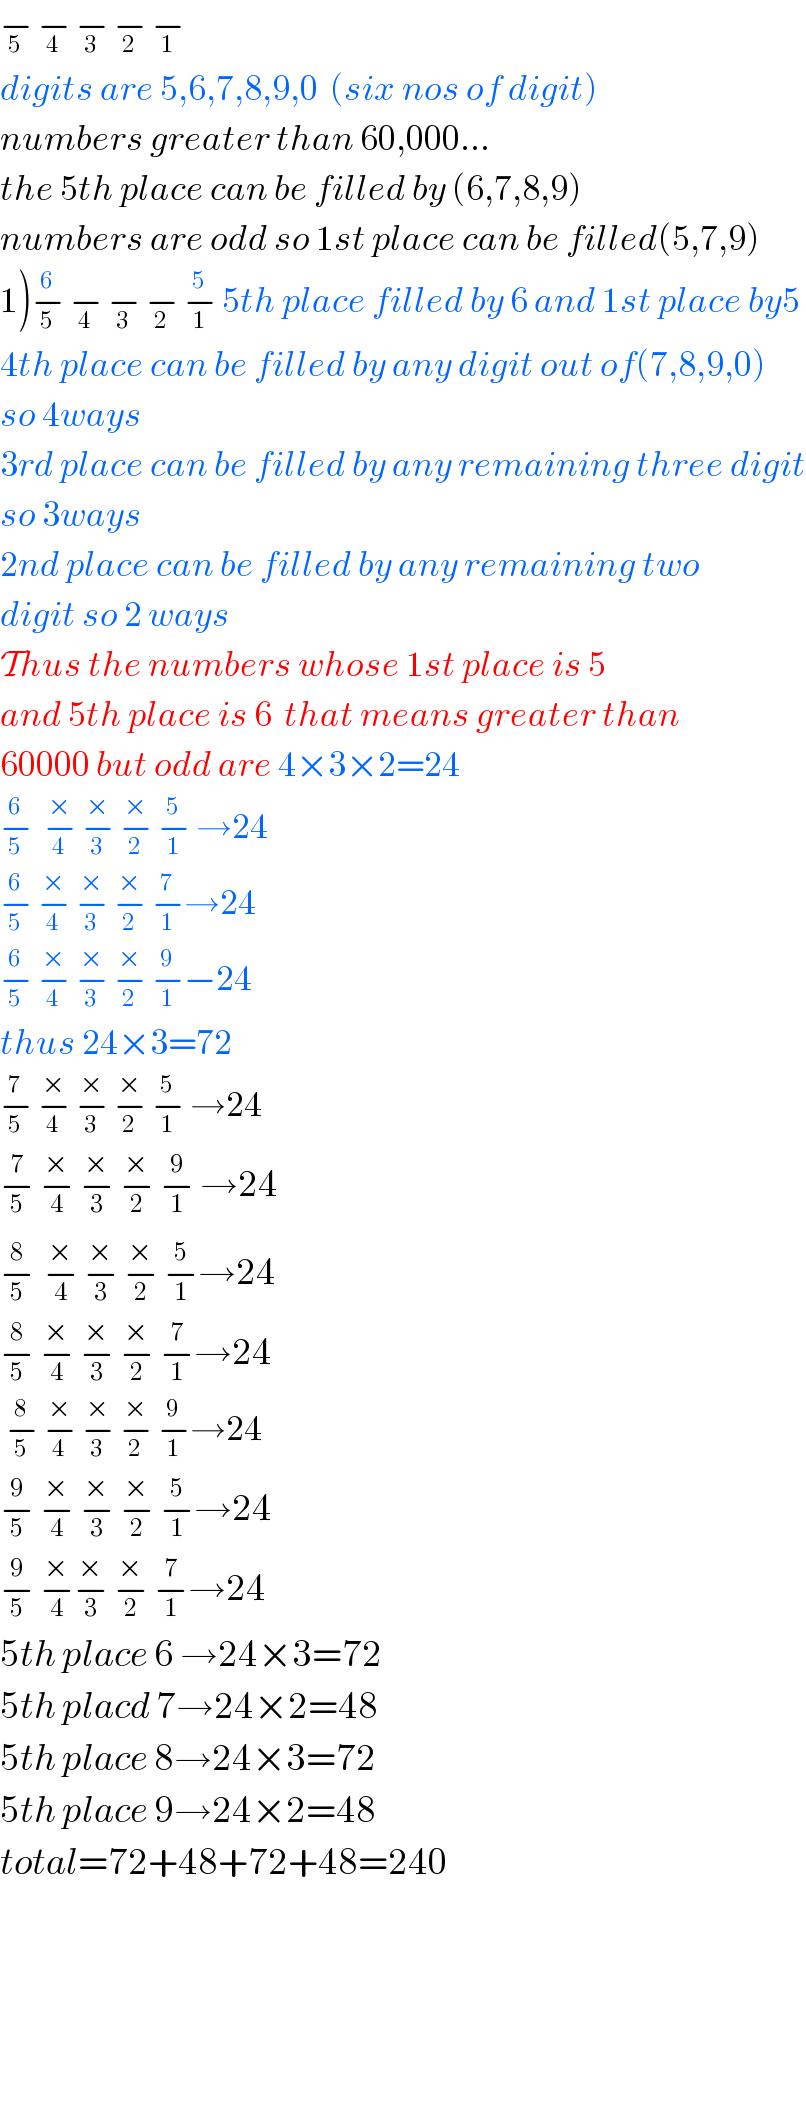 −_5  −_4  −_3  −_2  −_1    digits are 5,6,7,8,9,0  (six nos of digit)  numbers greater than 60,000...  the 5th place can be filled by (6,7,8,9)  numbers are odd so 1st place can be filled(5,7,9)  1)−_5 ^6  −_4  −_3  −_2  −_1 ^5  5th place filled by 6 and 1st place by5  4th place can be filled by any digit out of(7,8,9,0)  so 4ways  3rd place can be filled by any remaining three digit  so 3ways  2nd place can be filled by any remaining two  digit so 2 ways  Thus the numbers whose 1st place is 5  and 5th place is 6  that means greater than  60000 but odd are 4×3×2=24  −_5 ^6   −_4 ^×  −_3 ^×  −_2 ^×  −_1 ^5  →24  −_5 ^6  −_4 ^×  −_3 ^×  −_2 ^×  −_1 ^7 →24  −_5 ^6  −_4 ^×  −_3 ^×  −_2 ^×  −_1 ^9 −24  thus 24×3=72  −_5 ^7  −_4 ^×  −_3 ^×  −_2 ^×  −_1 ^5  →24  −_5 ^7  −_4 ^×  −_3 ^×  −_2 ^×  −_1 ^9  →24  −_5 ^8  ^ −_4 ^×  −_3 ^×  −_2 ^×  −_1 ^5 →24  −_5 ^8  −_4 ^×  −_3 ^×  −_2 ^×  −_1 ^7 →24   −_5 ^8  −_4 ^×  −_3 ^×  −_2 ^×  −_1 ^9 →24  −_5 ^9  −_4 ^×  −_3 ^×  −_2 ^×  −_1 ^5 →24  −_5 ^9  −_4 ^× −_3 ^×  −_2 ^×  −_1 ^7 →24  5th place 6 →24×3=72  5th placd 7→24×2=48  5th place 8→24×3=72  5th place 9→24×2=48  total=72+48+72+48=240             